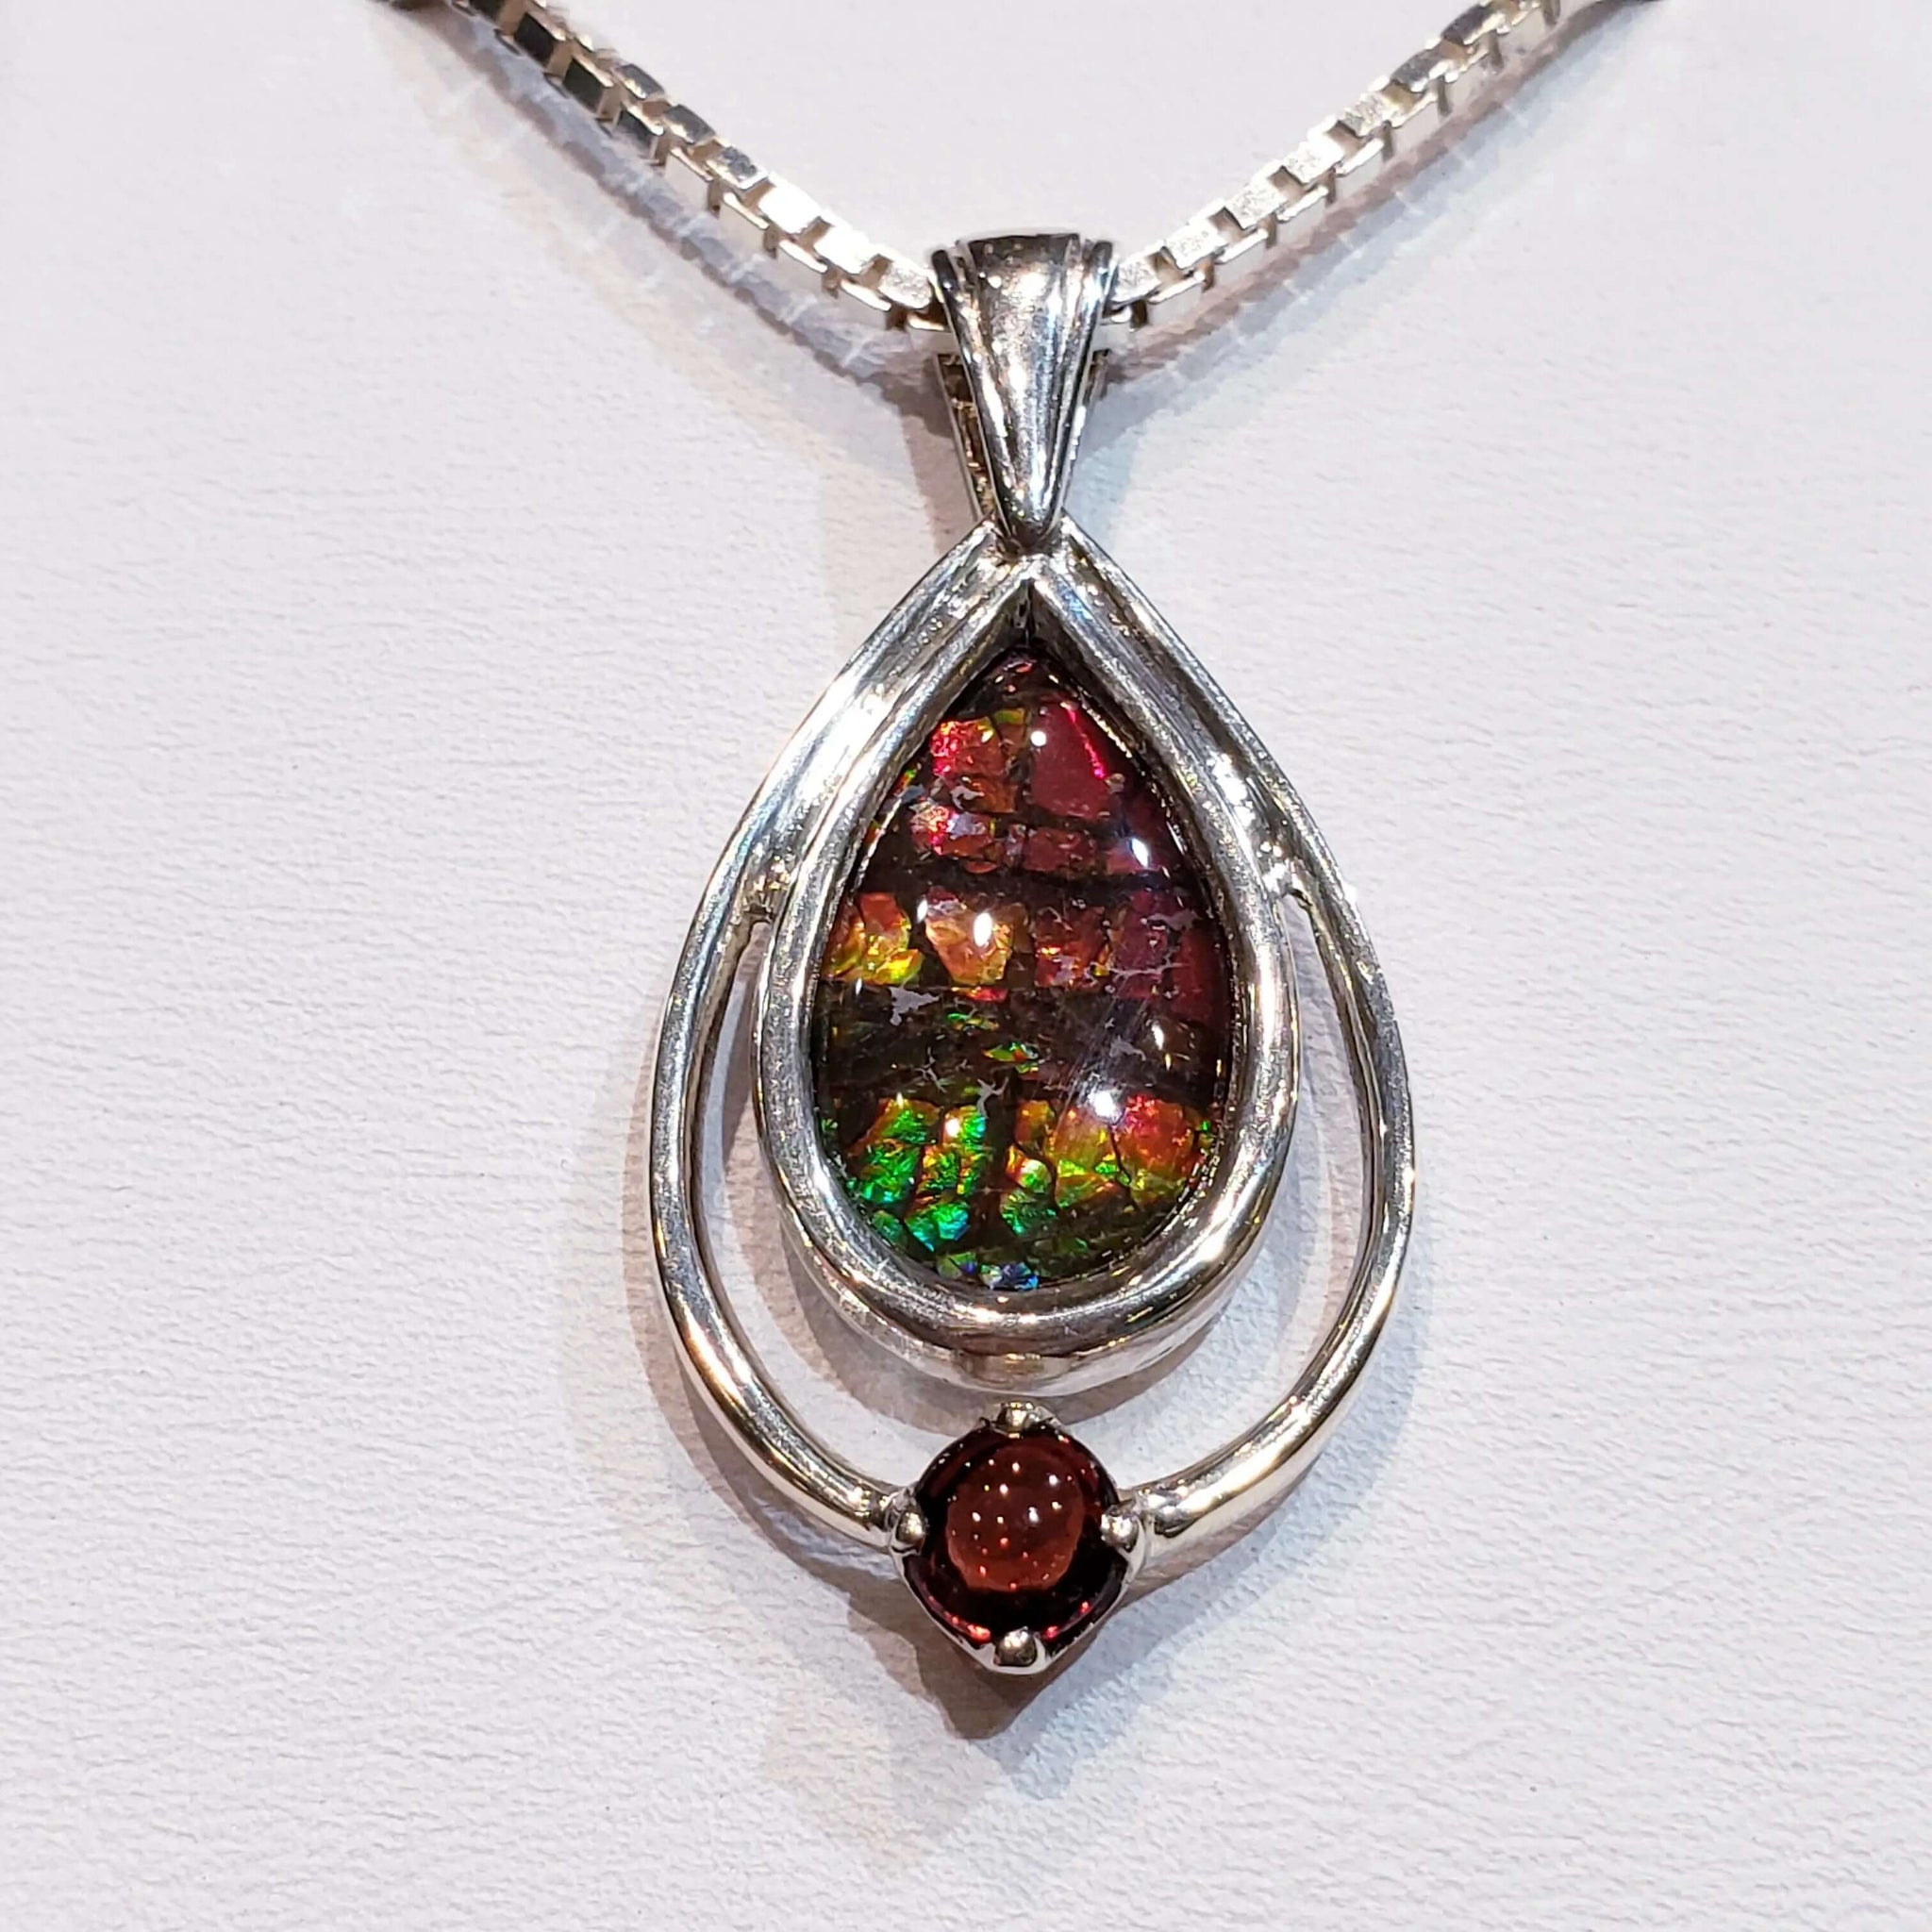 Ammolite Pendant With Garnet 18x11mm In Sterling Silver Pn. E10624 %product from Empire Ammolite